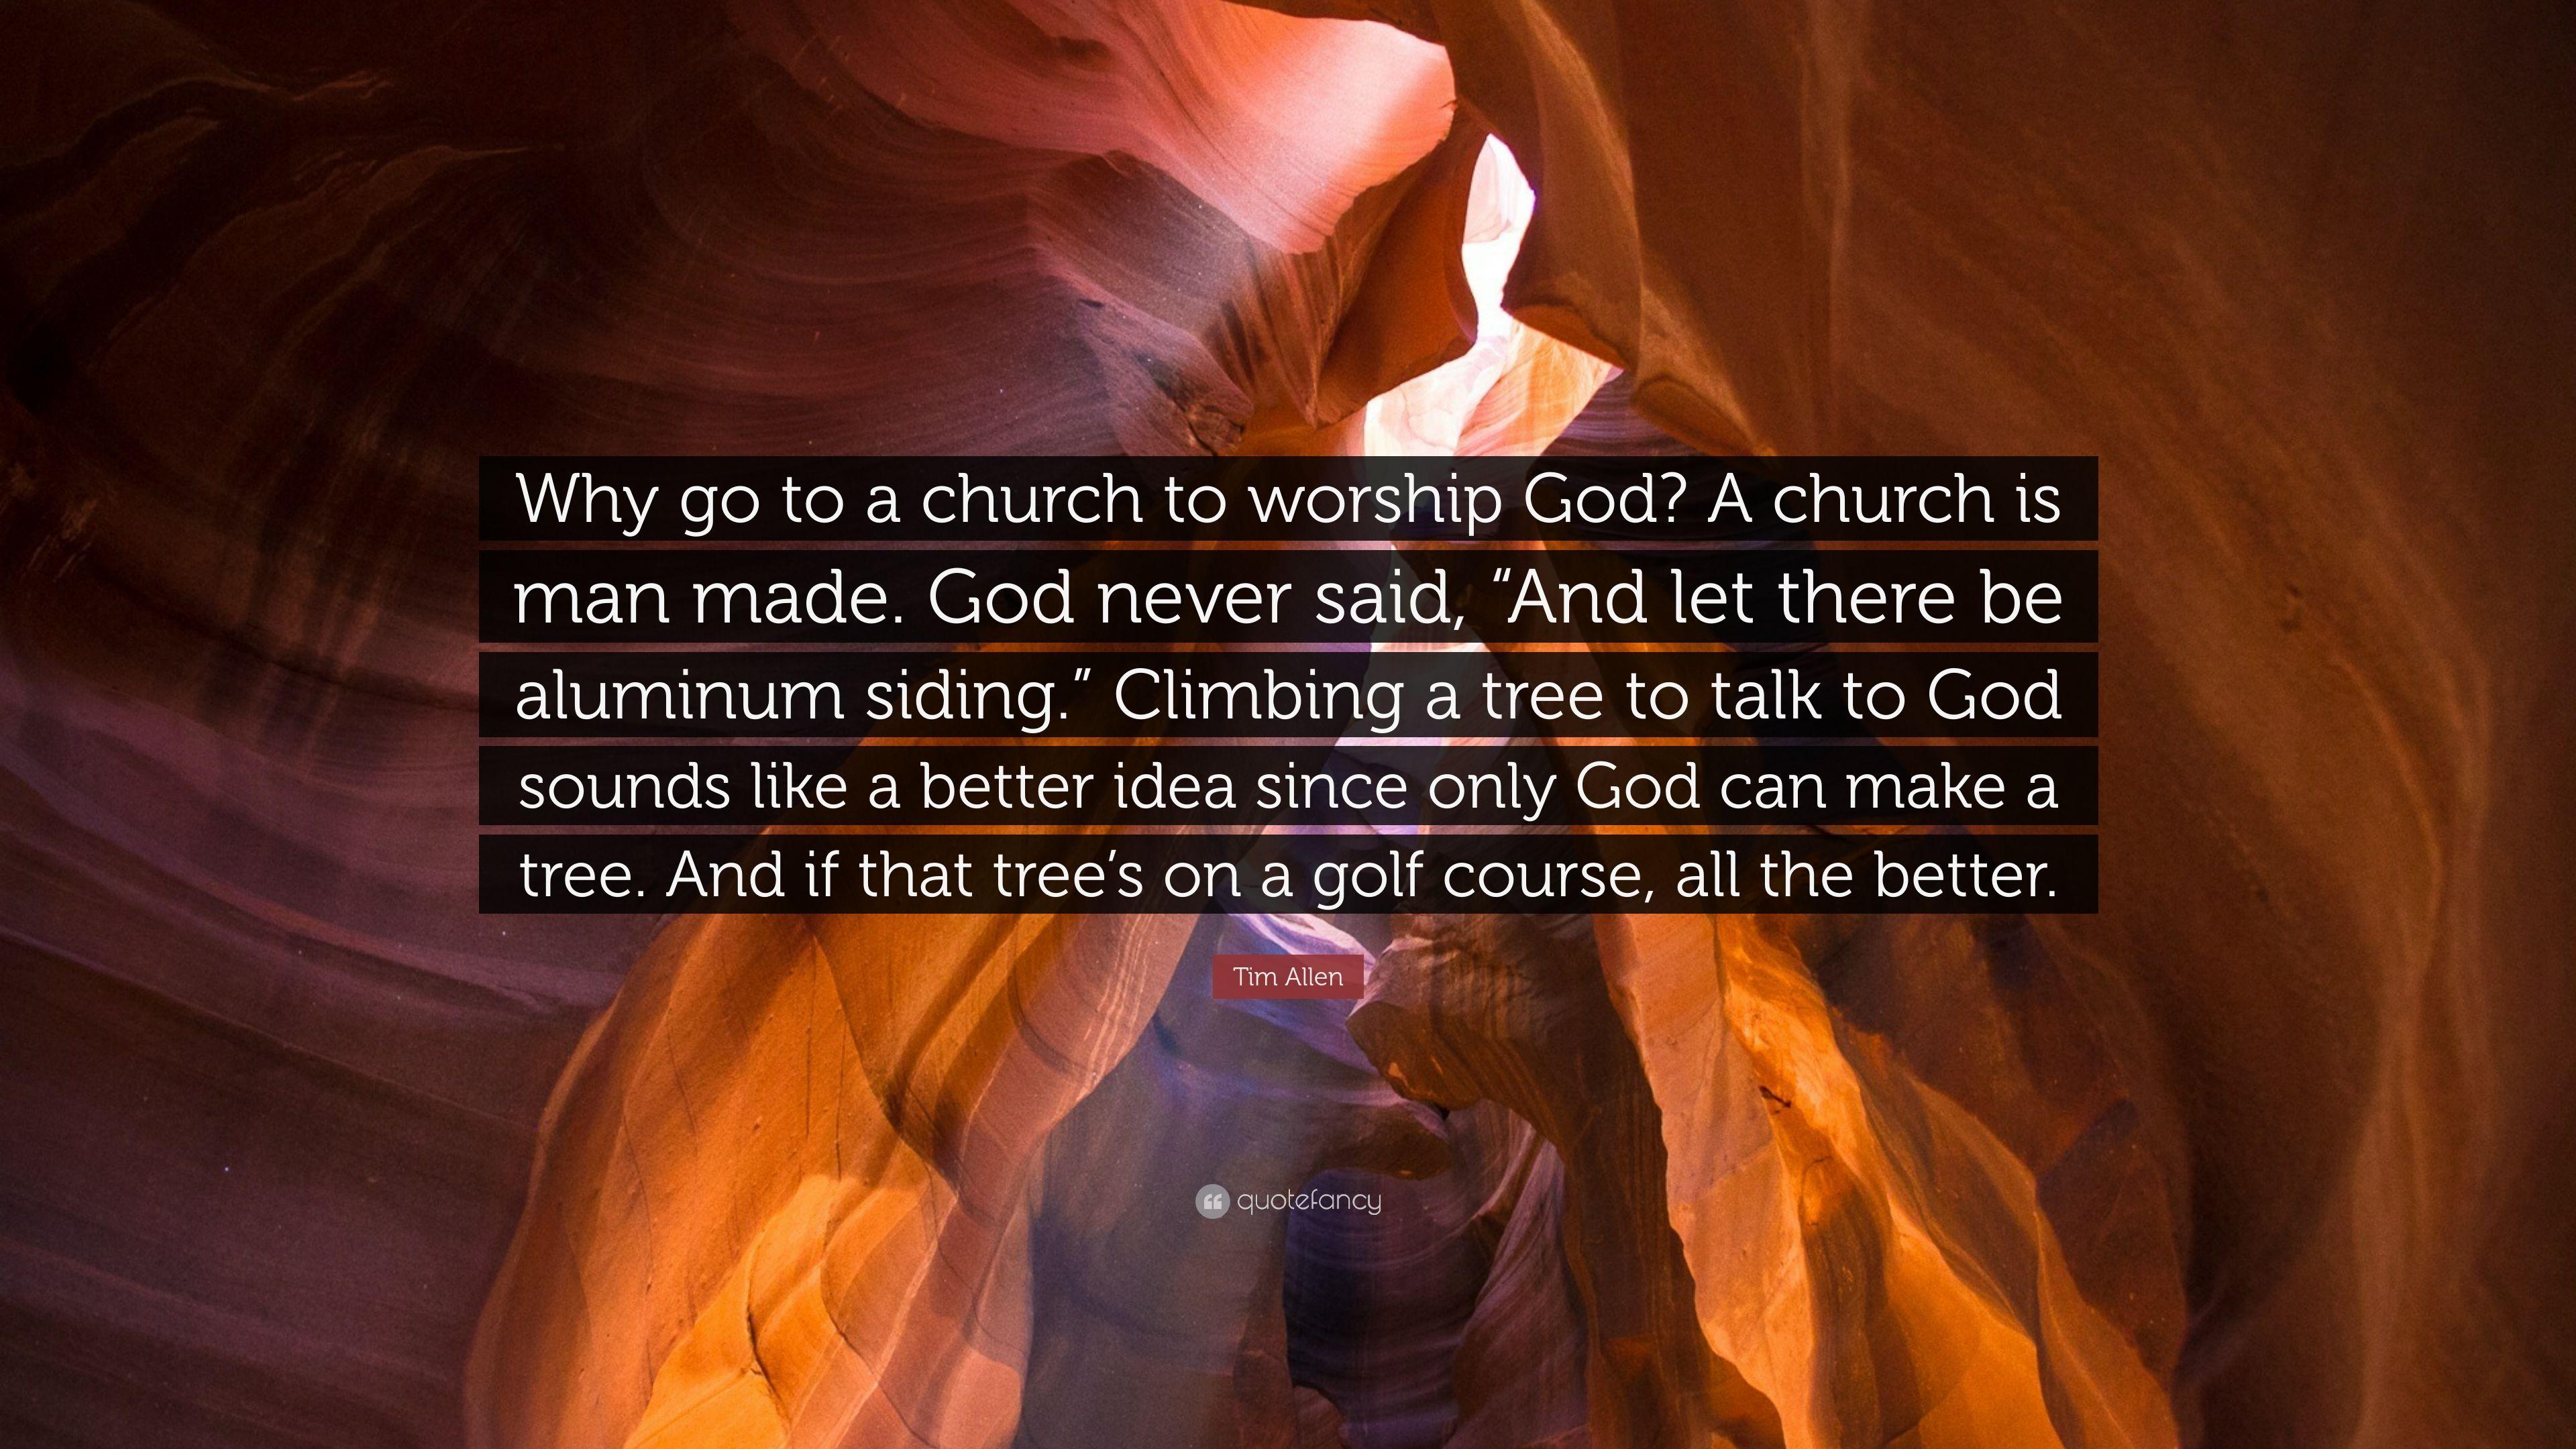 Tim Allen Quote: “Why go to a church to worship God? A